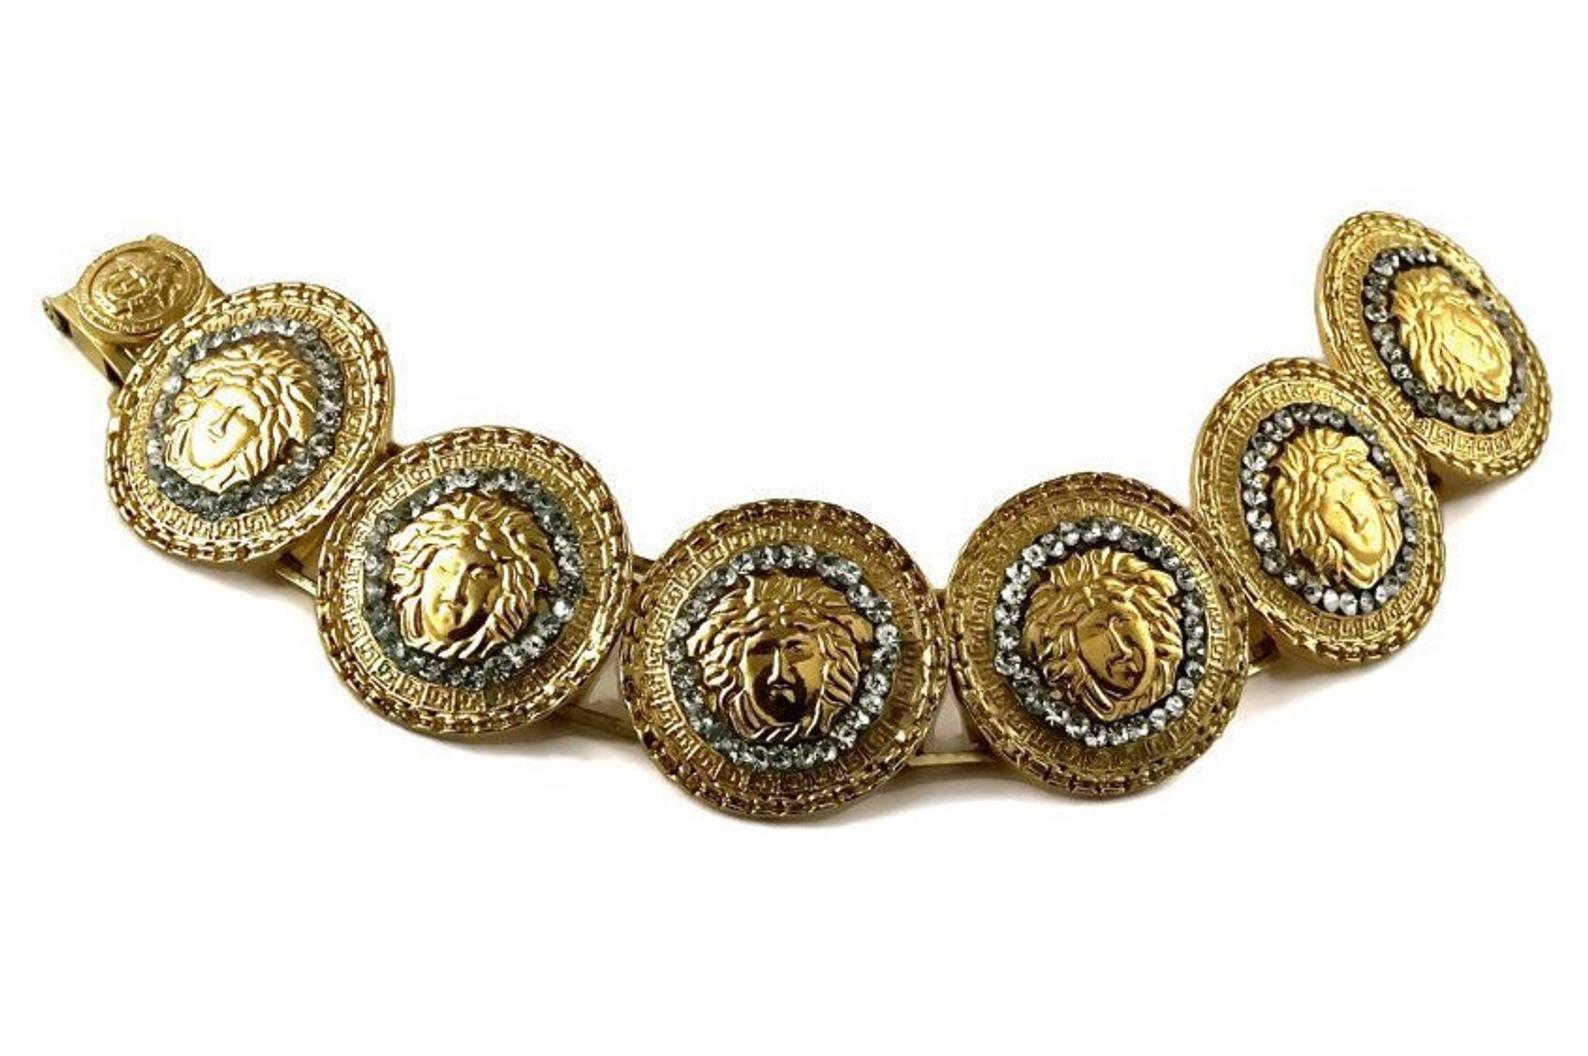 Vintage GIANNI VERSACE Iconic Medusa Rhinestone Bracelet

Measurements:
Height: 1 1/8 inches (2.85 cm)
Wearable Length: 7 3/8 inches (18.73 cm)

Features:
- 100% Authentic GIANNI VERSACE.
- Iconic medusa links surrounded with sparkly rhinestones.
-